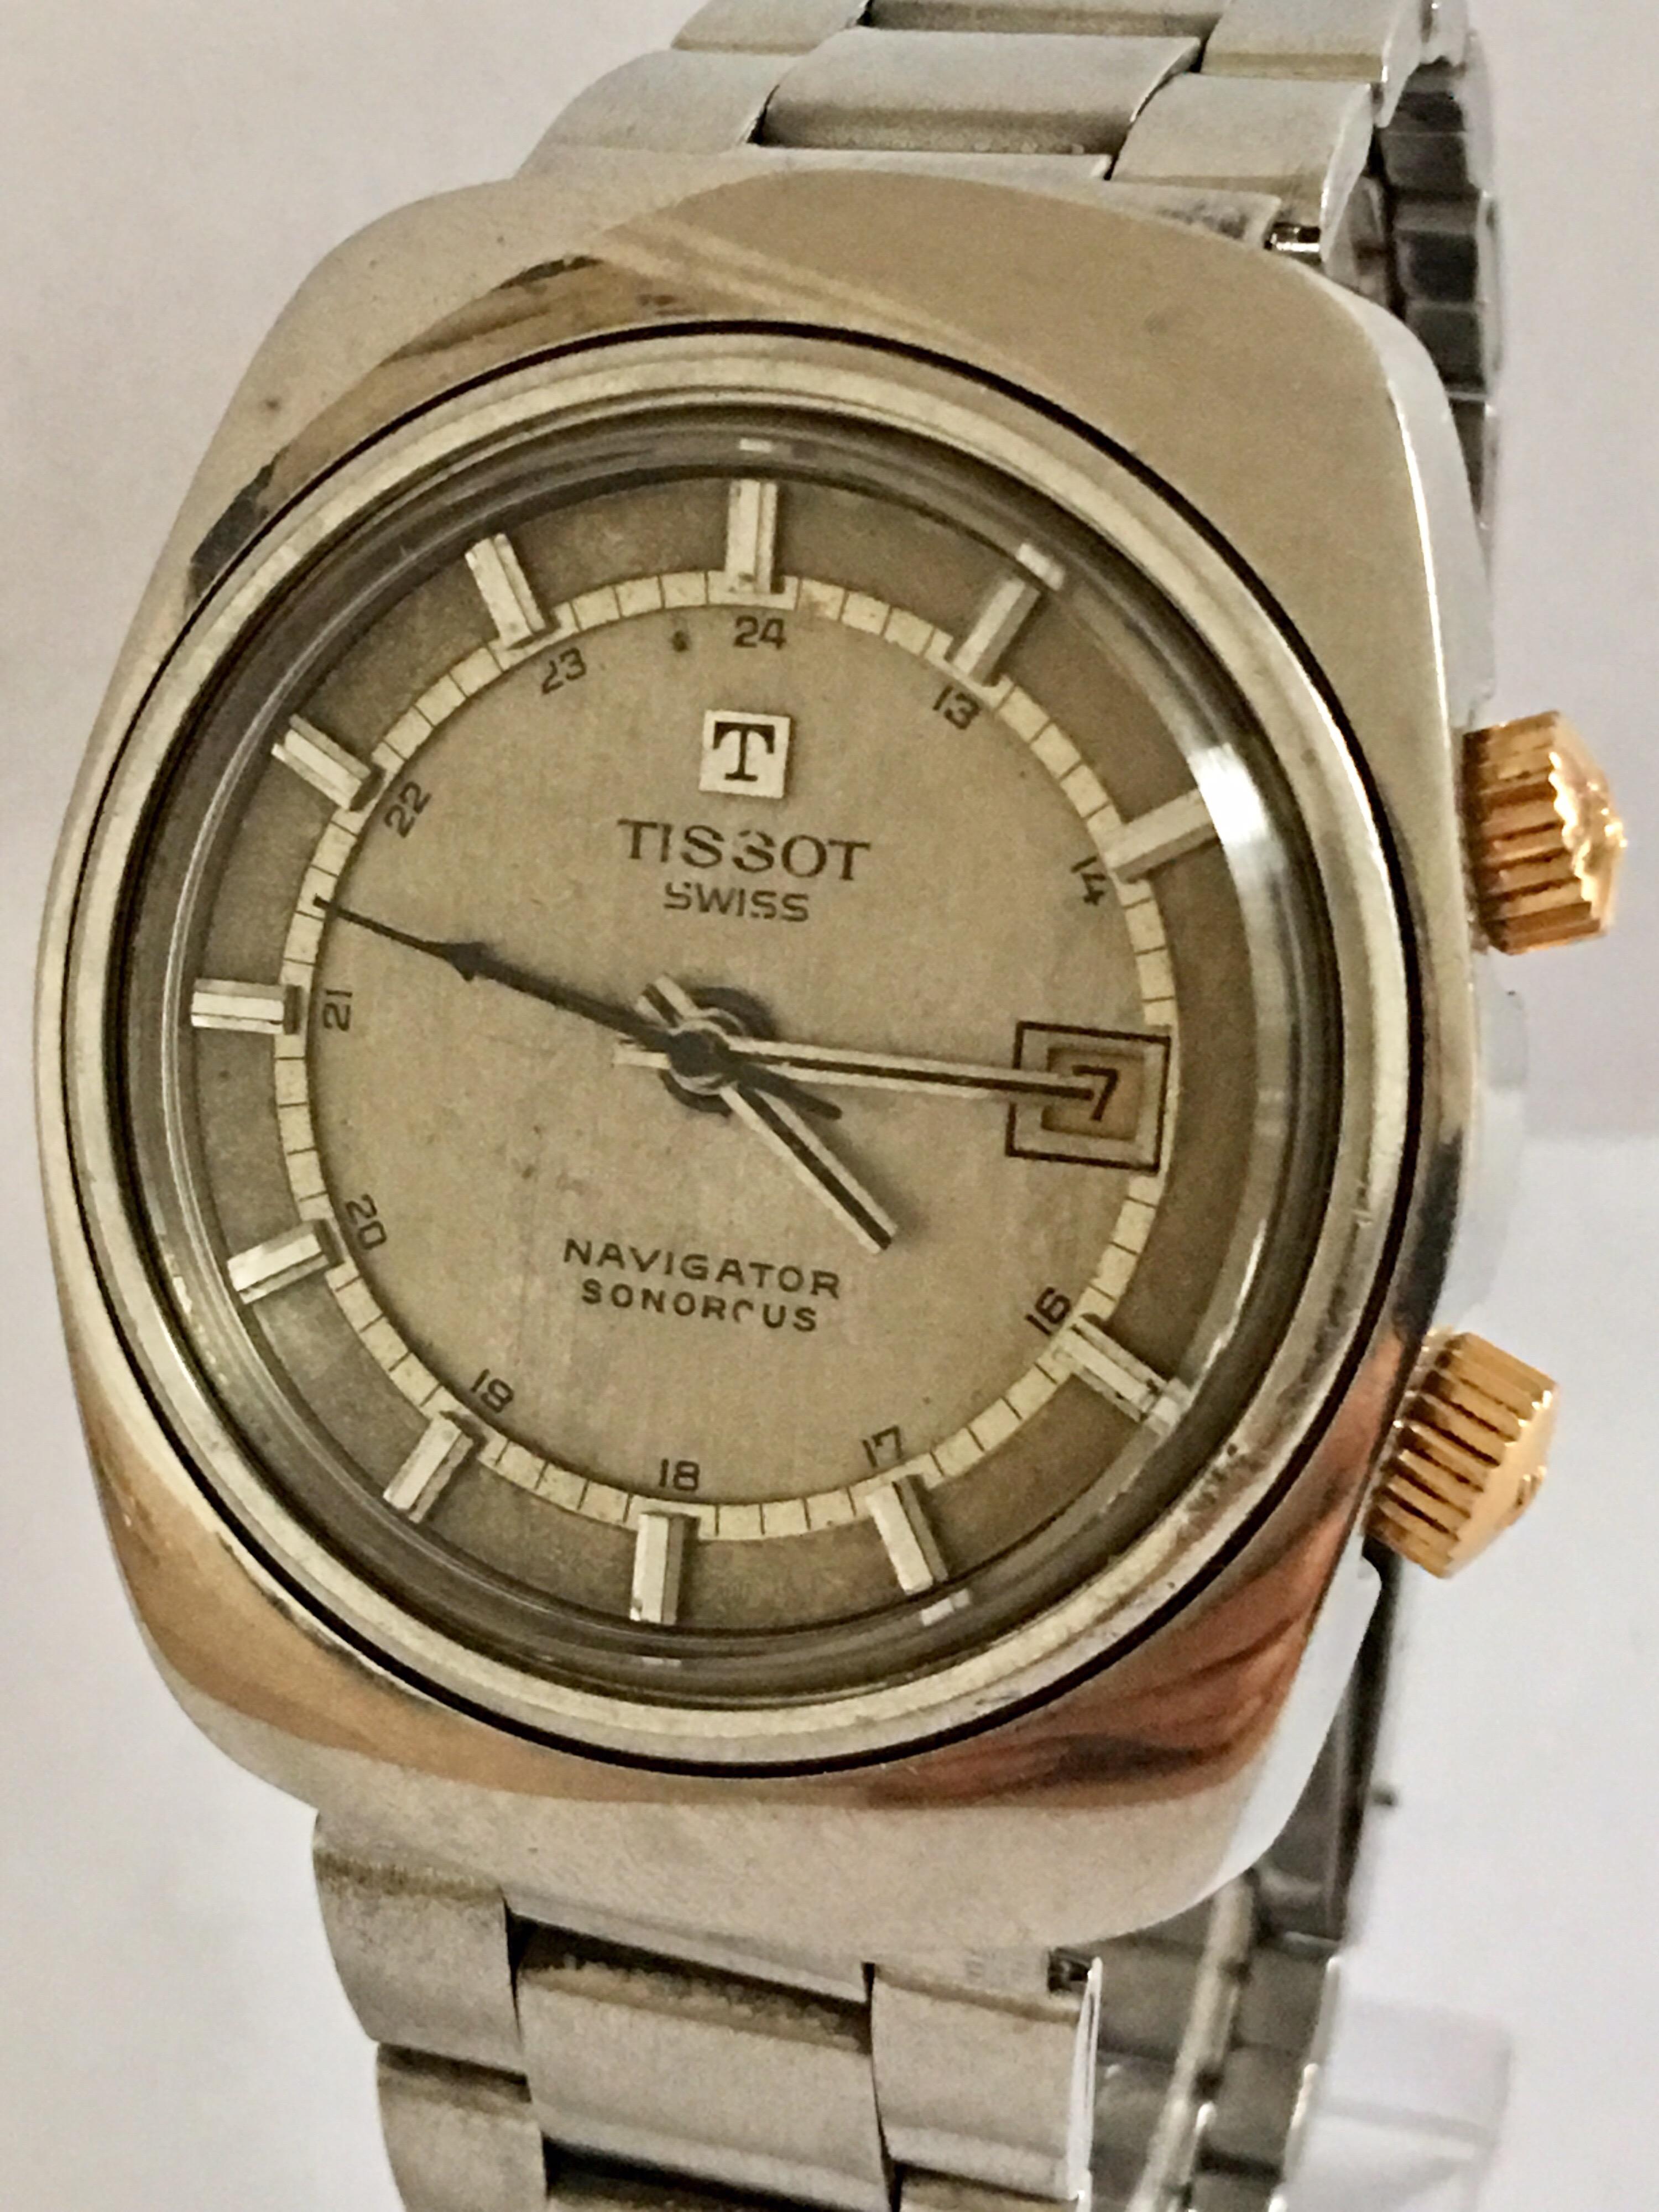 This Rare Vintage mechanical watch is in good Working condition. 
visible tiny scratches on its original Stainless steel strap as shown. 

Please study the images carefully as form part of the description.